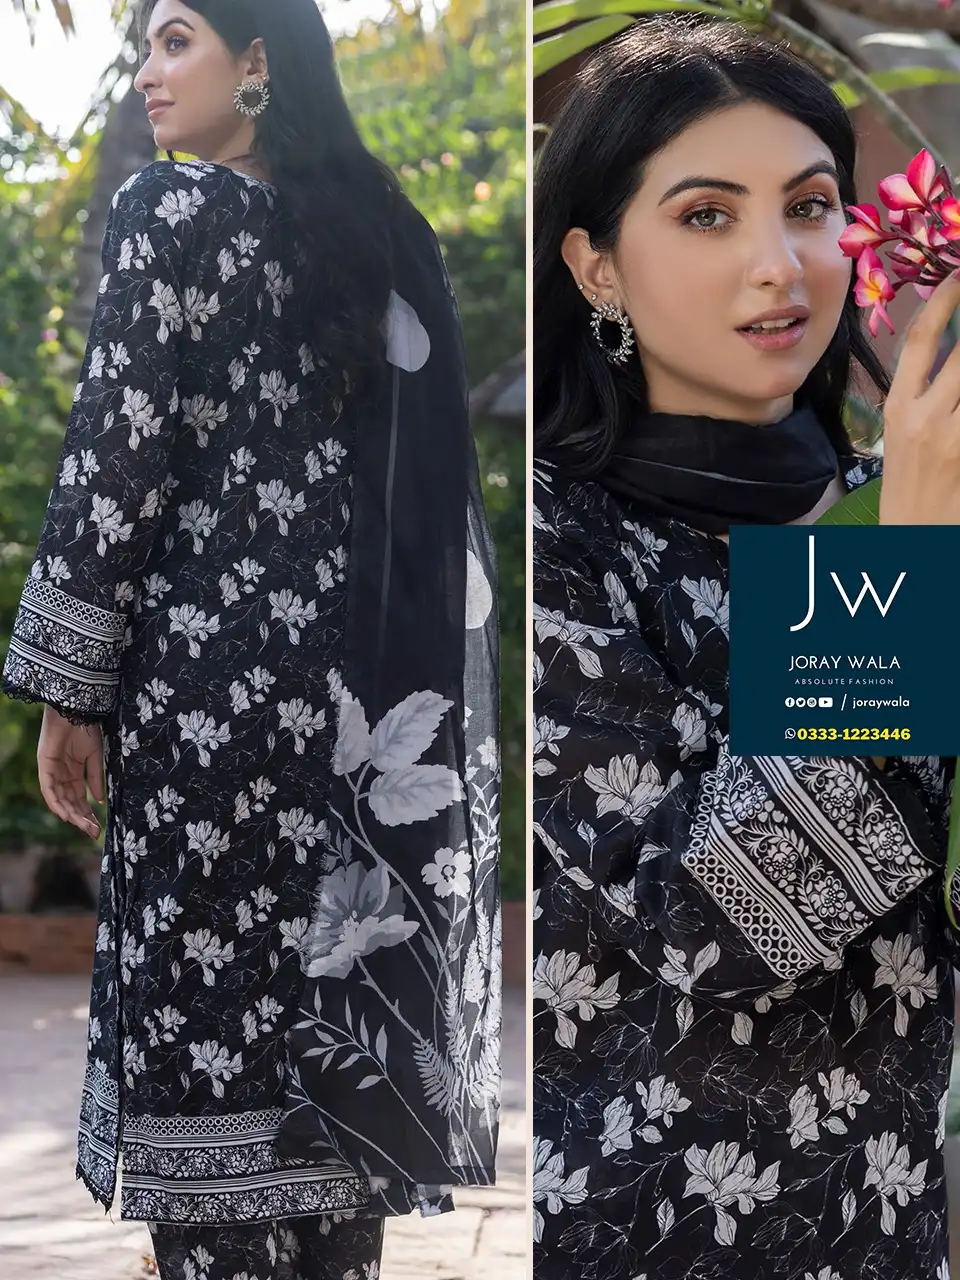 Iris allover black and white 3 pcs suit D5 with free delivery available at joraywala. AirJet Luxury Digital Printed Lawn Shirt. Airjet Luxury Digital Printed Lawn Dupatta. AirJet Luxury Digital Printed Trouser.